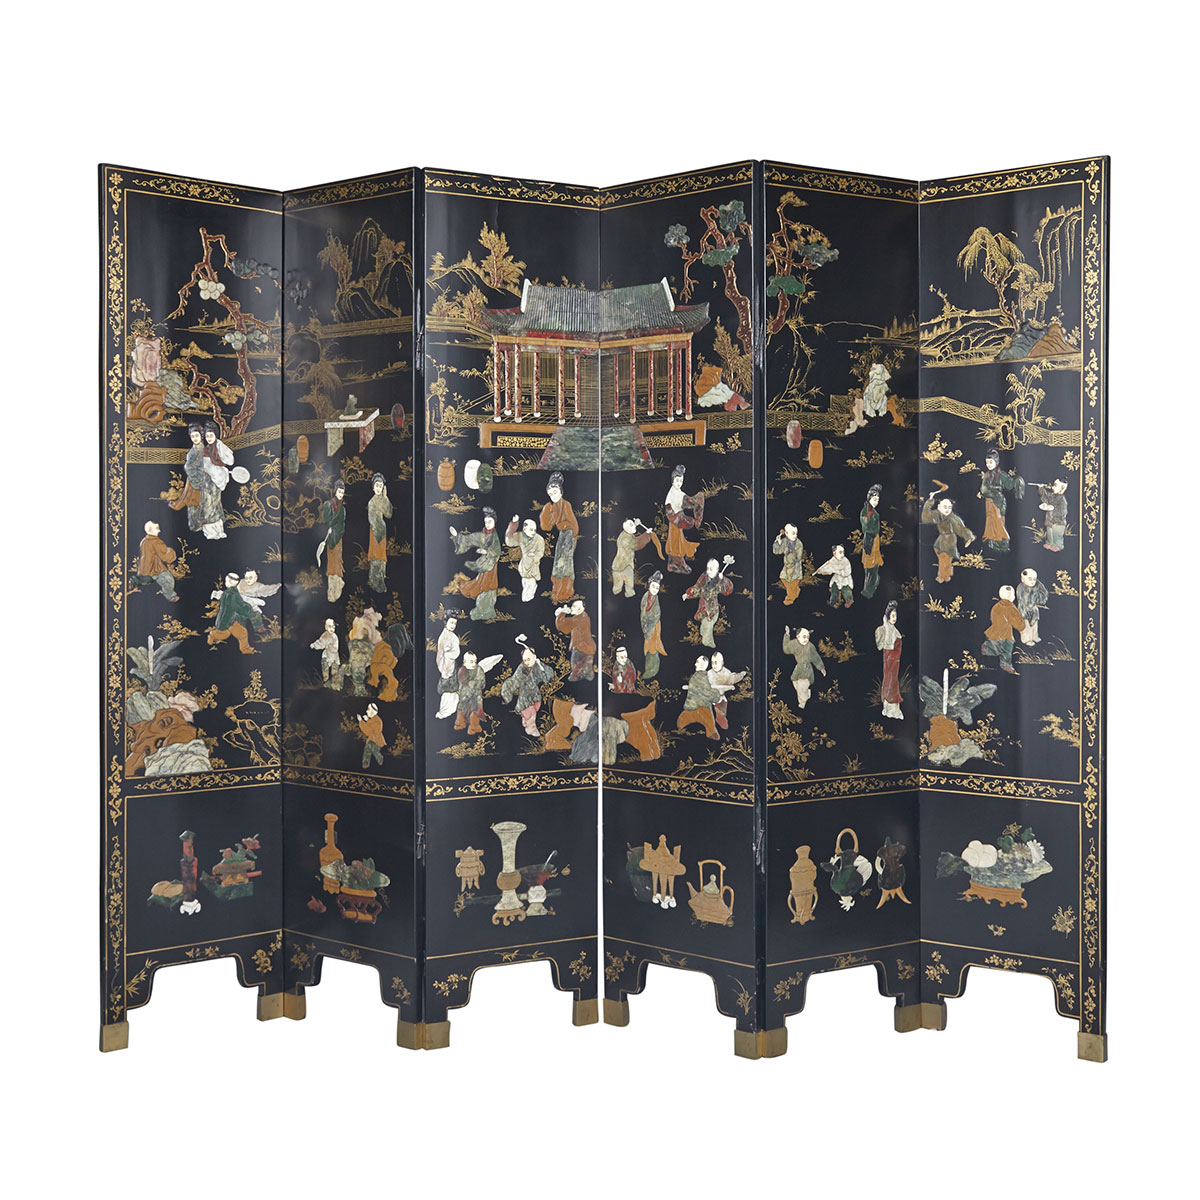 Six-Panel Hardstone and Ivory Inlay Black Lacquer Coromandel Screen, Late Qing Dynasty